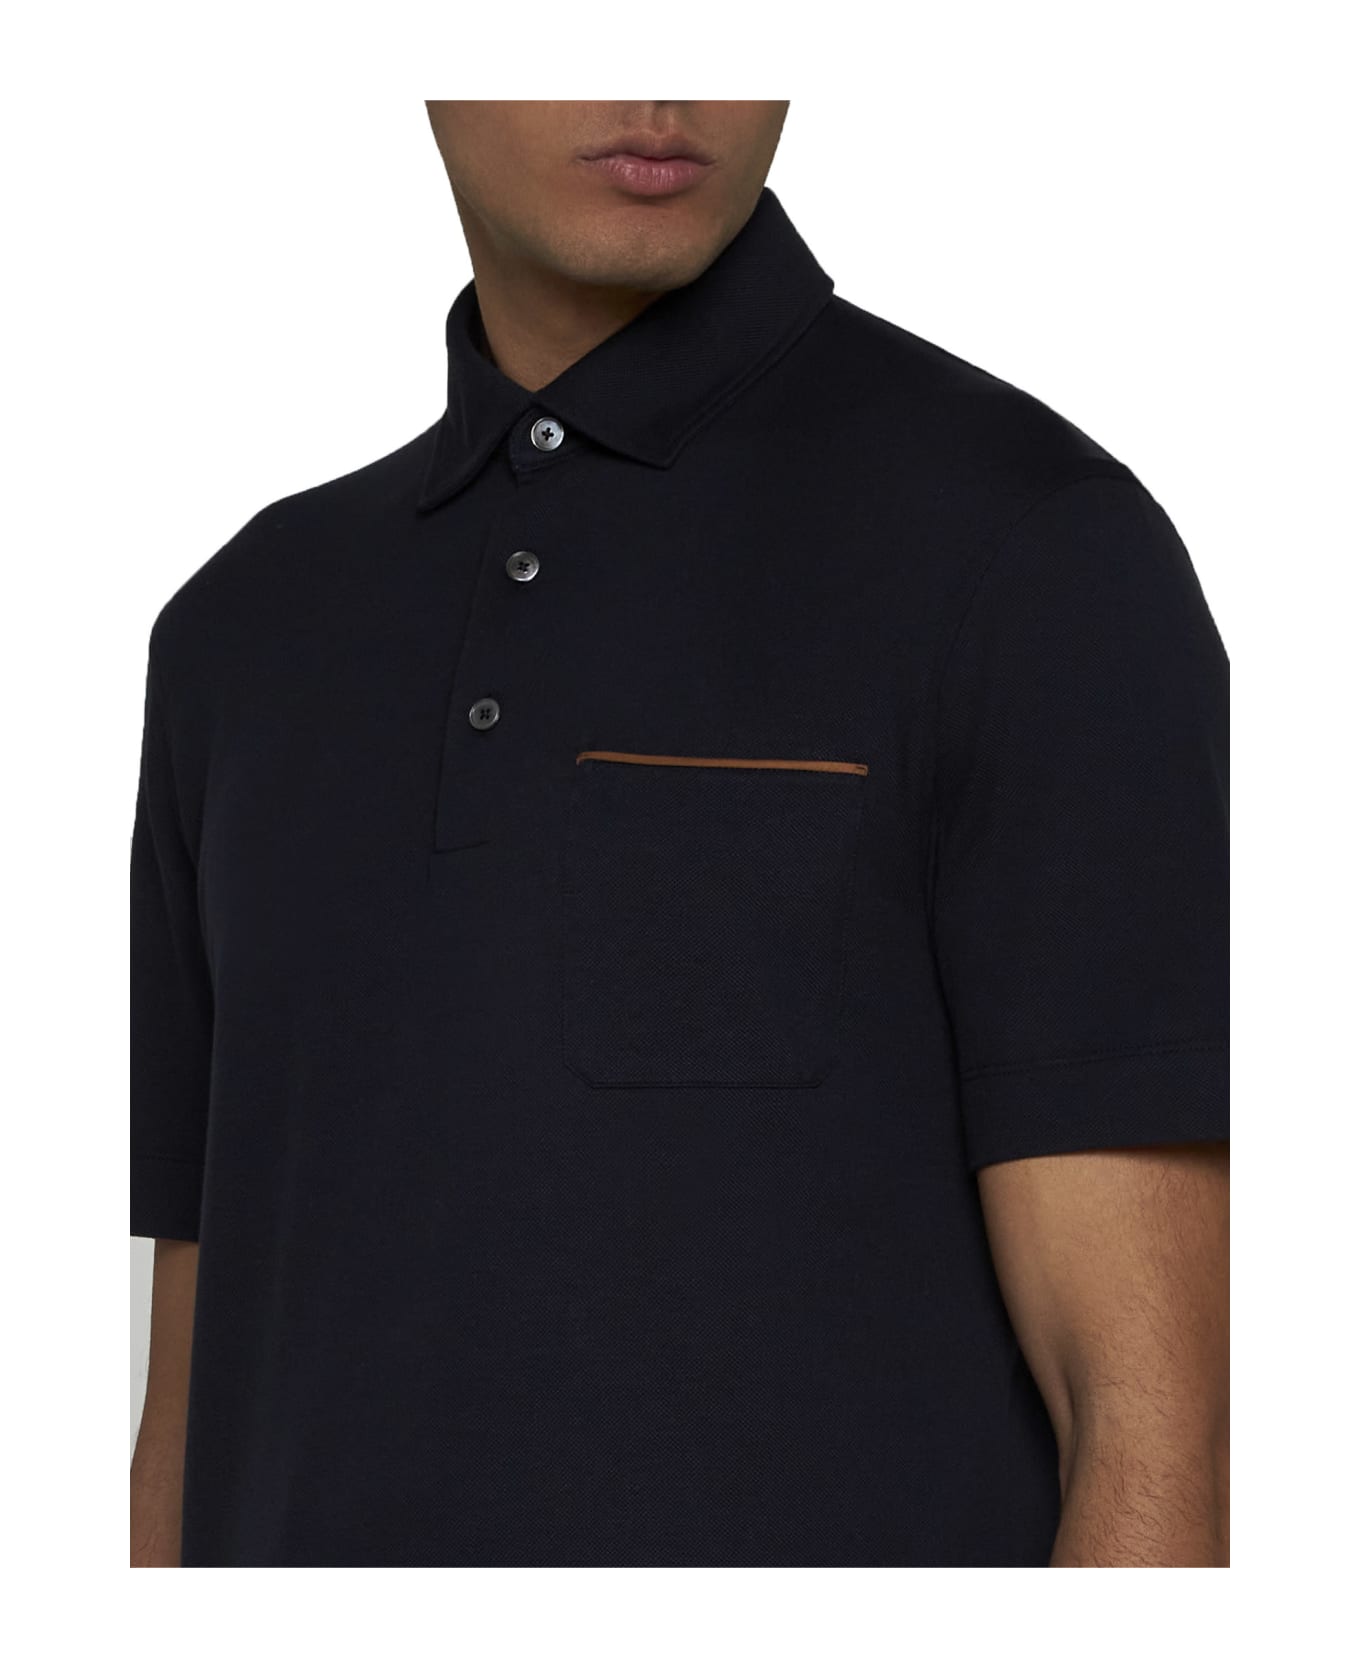 Zegna Polo Shirt - Navy ポロシャツ